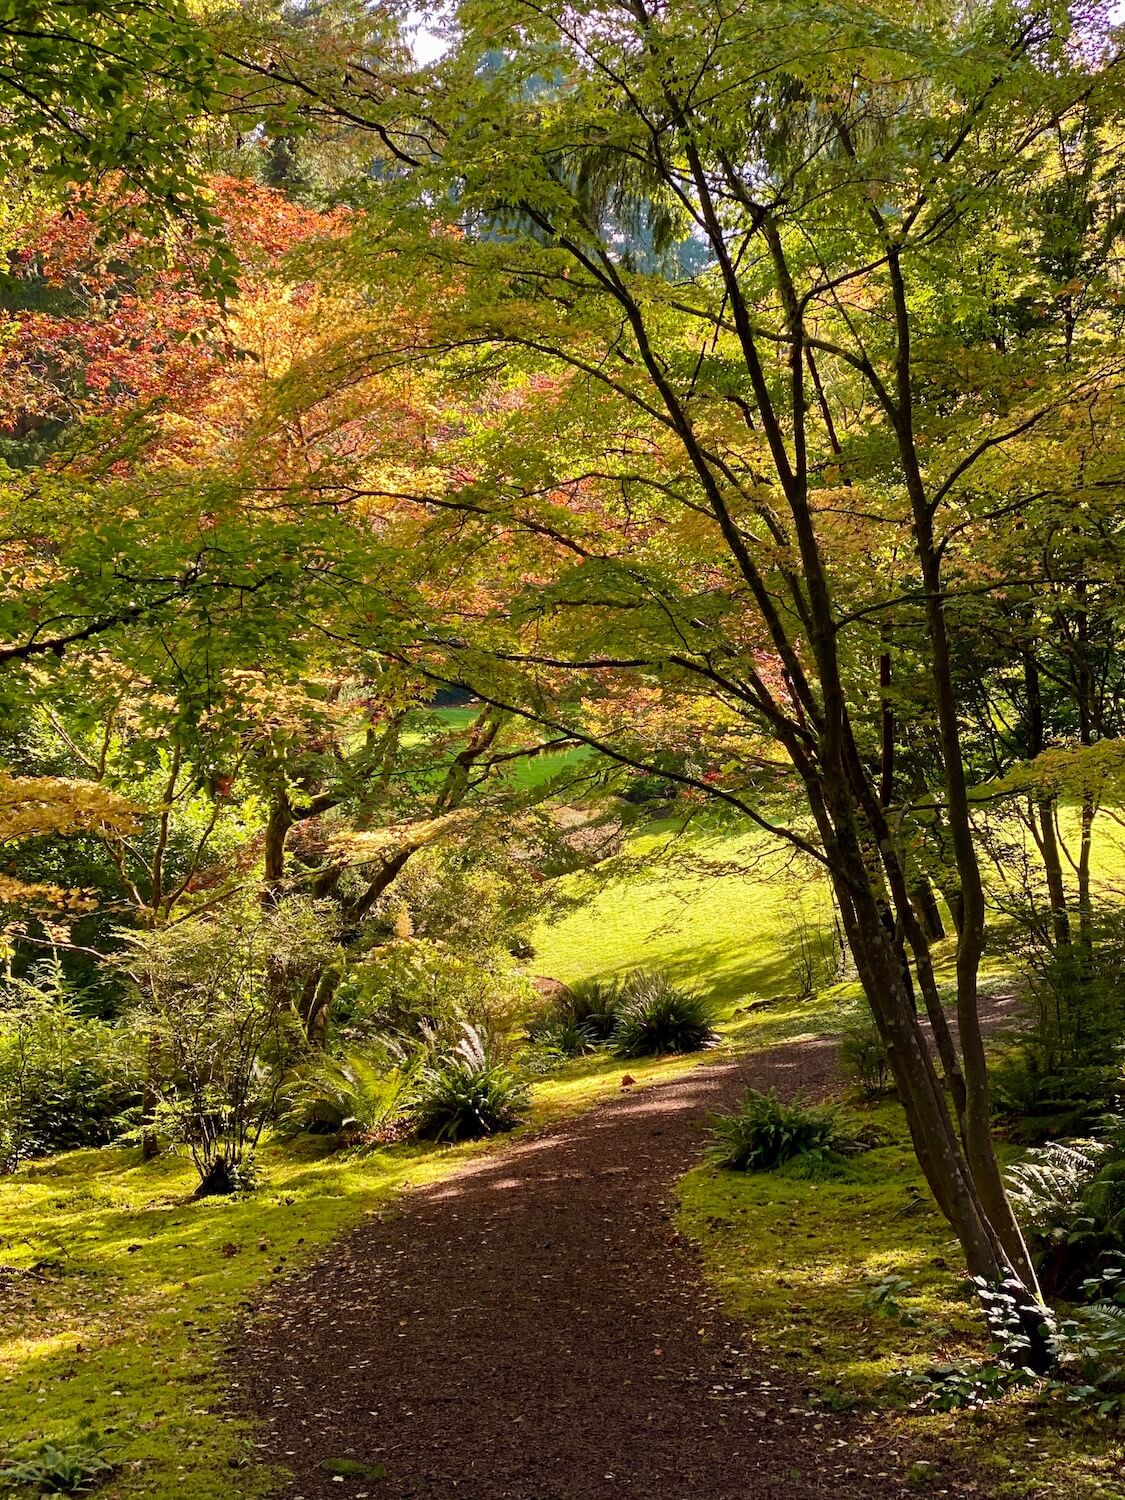 A series of medium size maples begin shedding Multi colored leaves in this fall scene. A trail of brown bark dust winds through mossy forest floors with a few ferns.